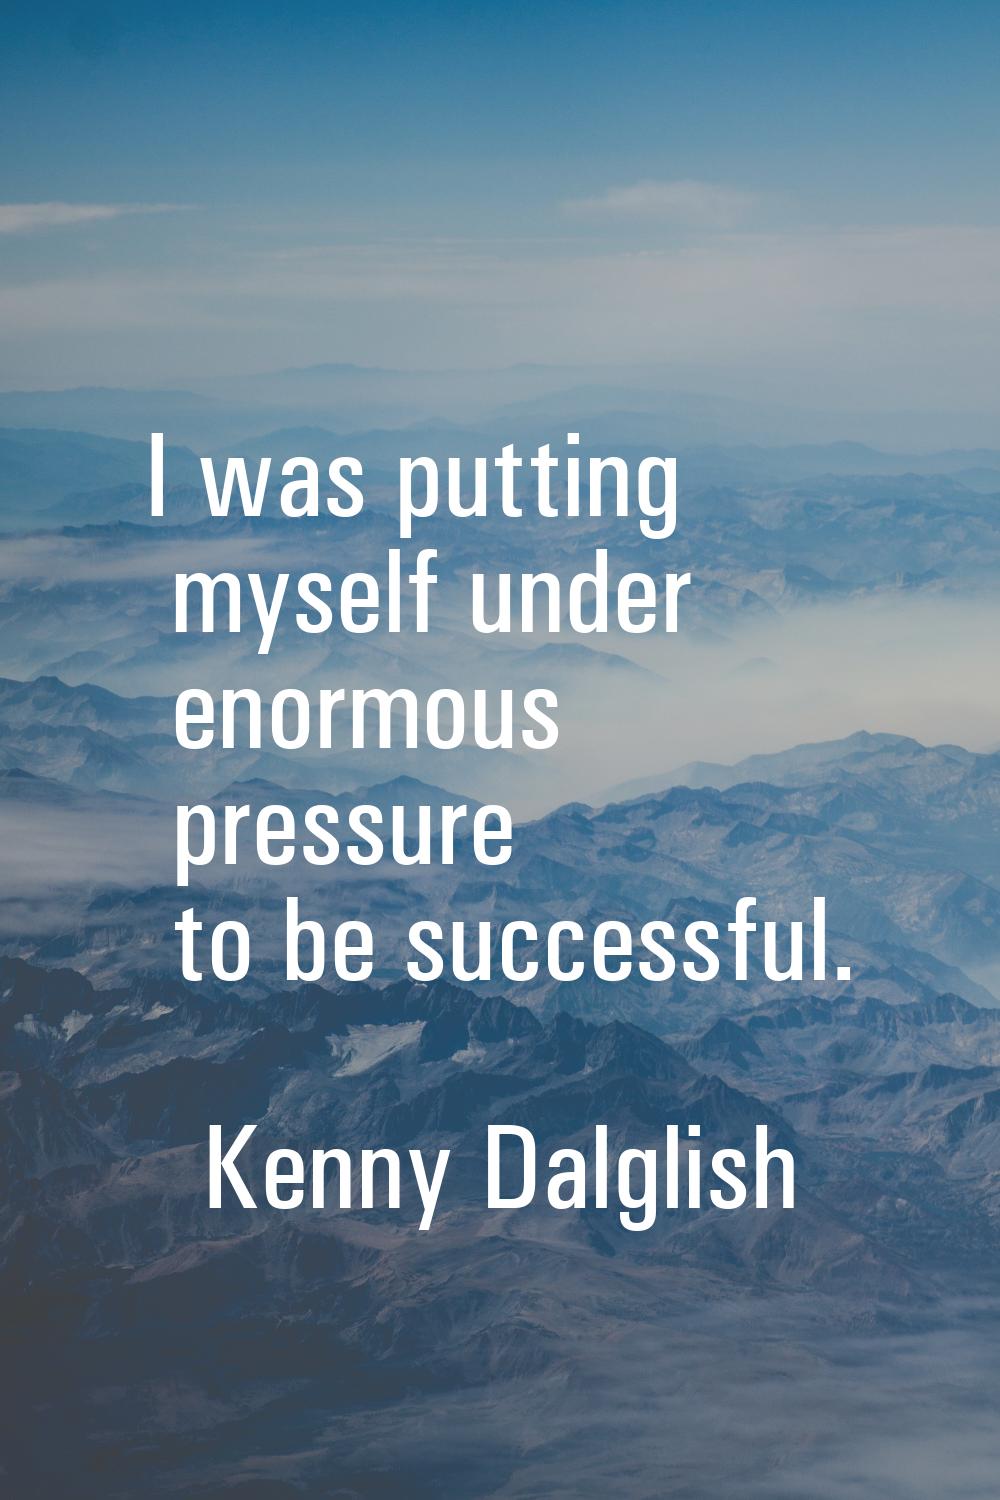 I was putting myself under enormous pressure to be successful.